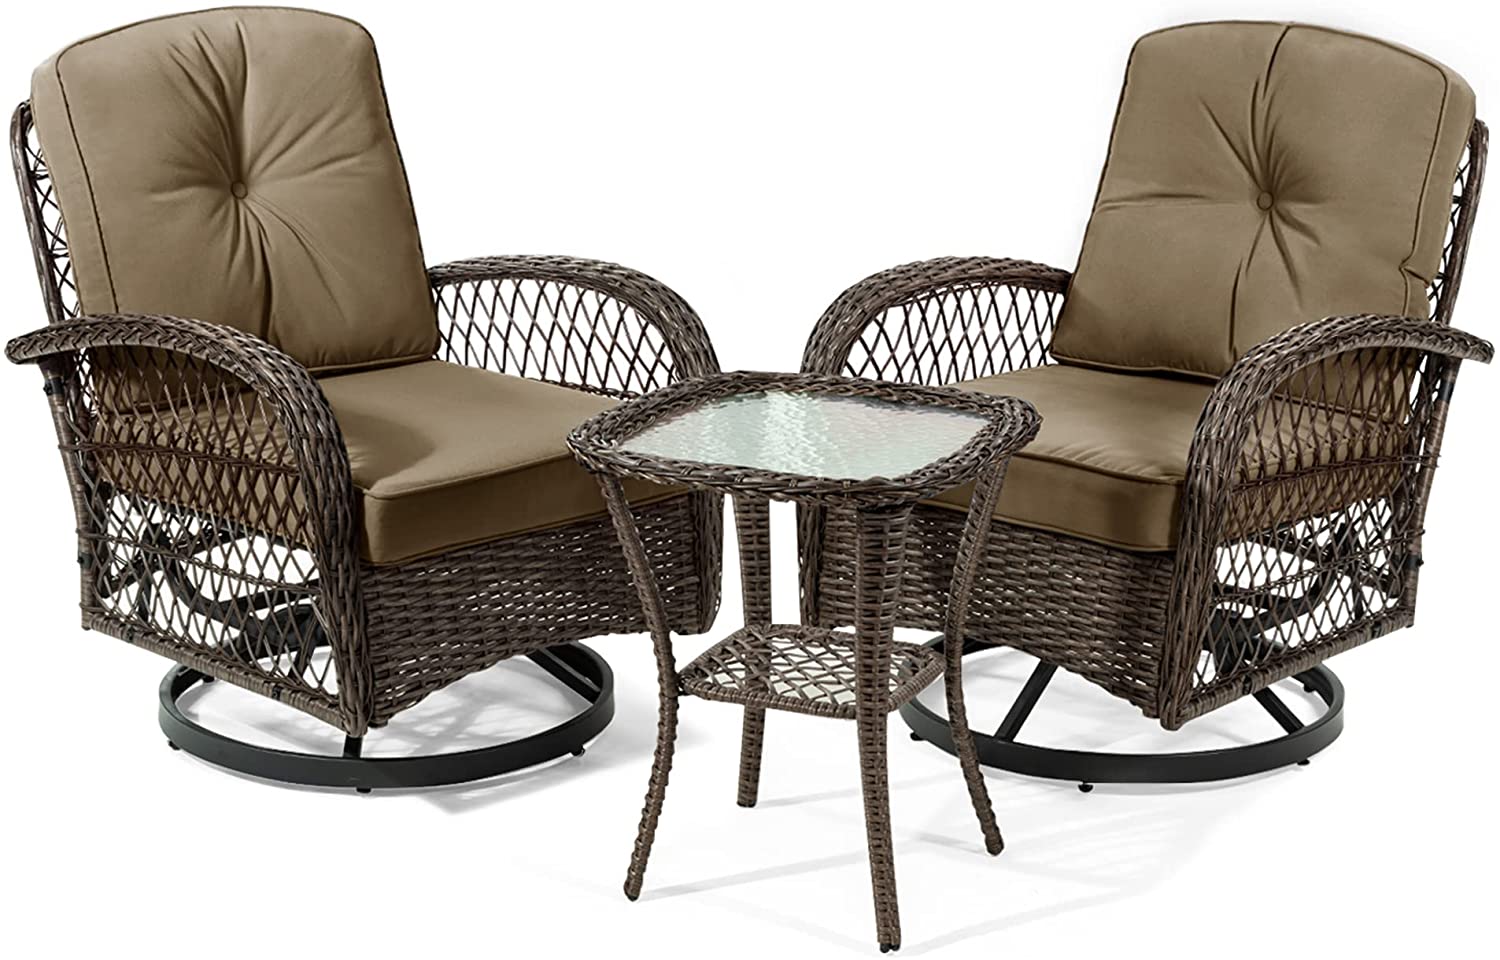 Amolife 3 Pieces Wicker Patio Furniture Set, Bistro Set with Outdoor Swivel Rocking Chair and Coffee Table, Khaki - image 2 of 9